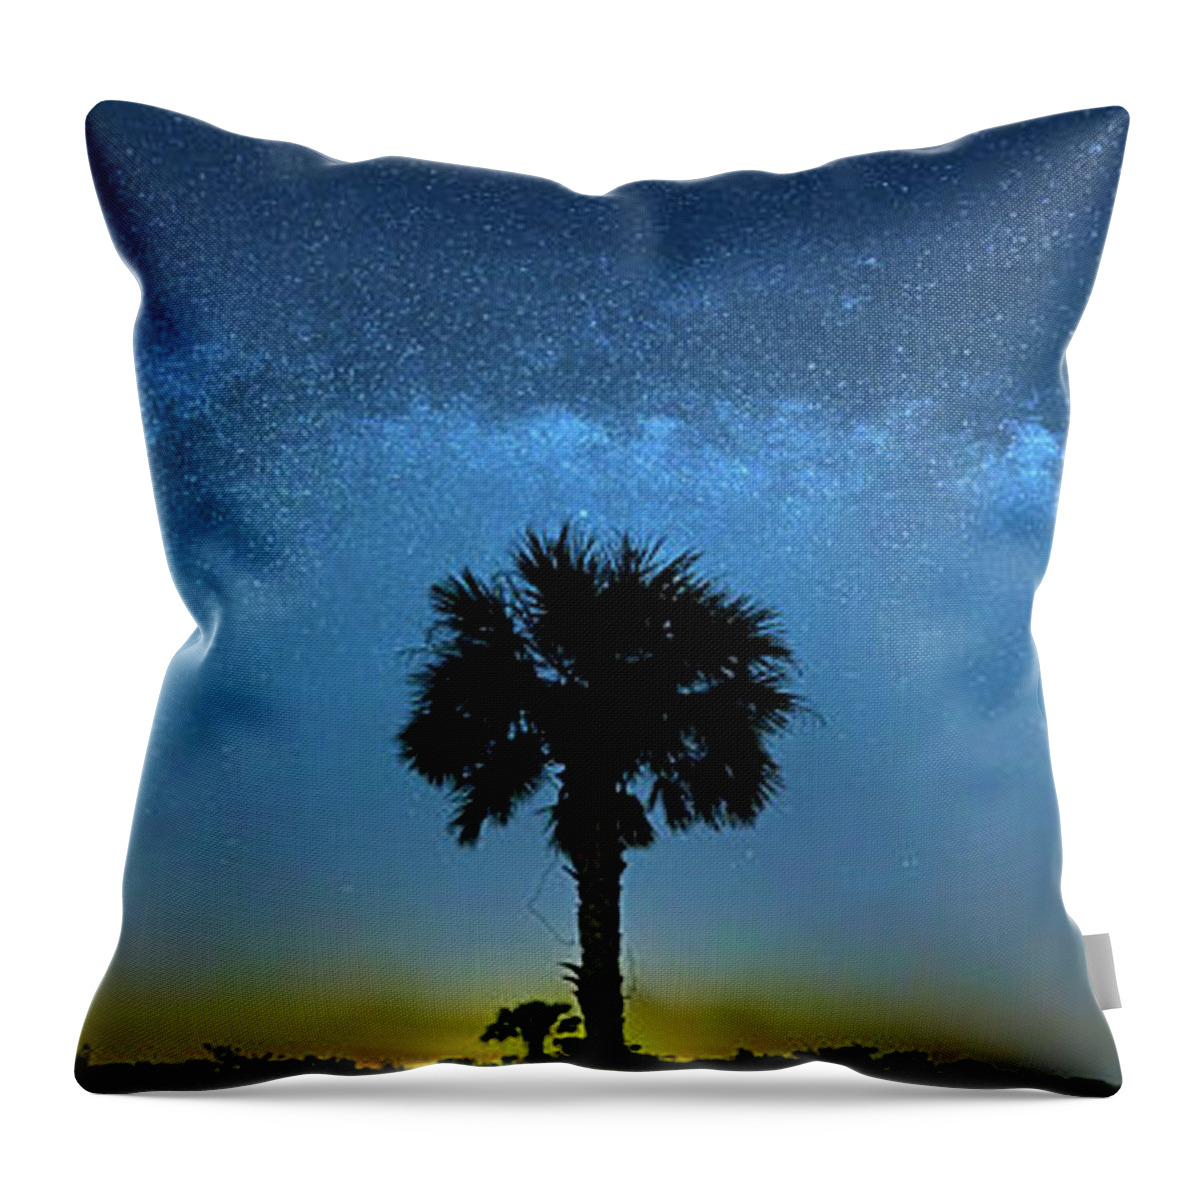 Milky Way Throw Pillow featuring the photograph Galactic Ocean by Mark Andrew Thomas